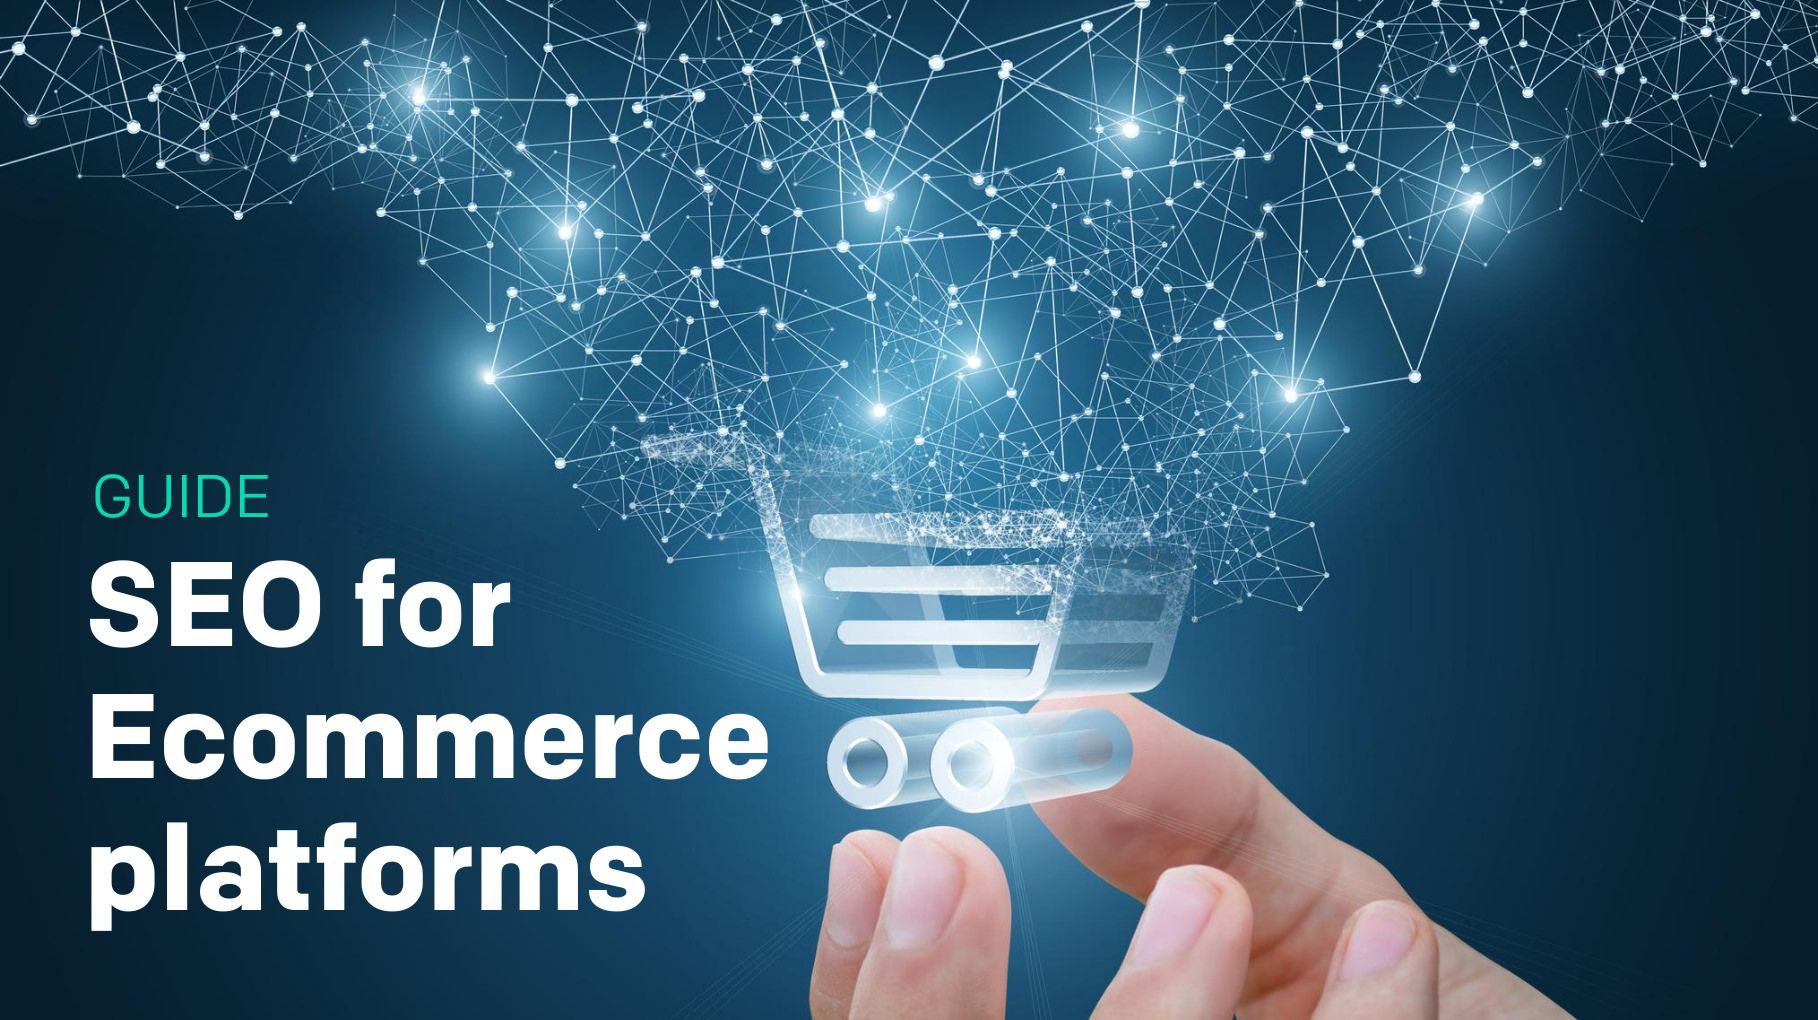 A guide to SEO for Ecommerce platforms